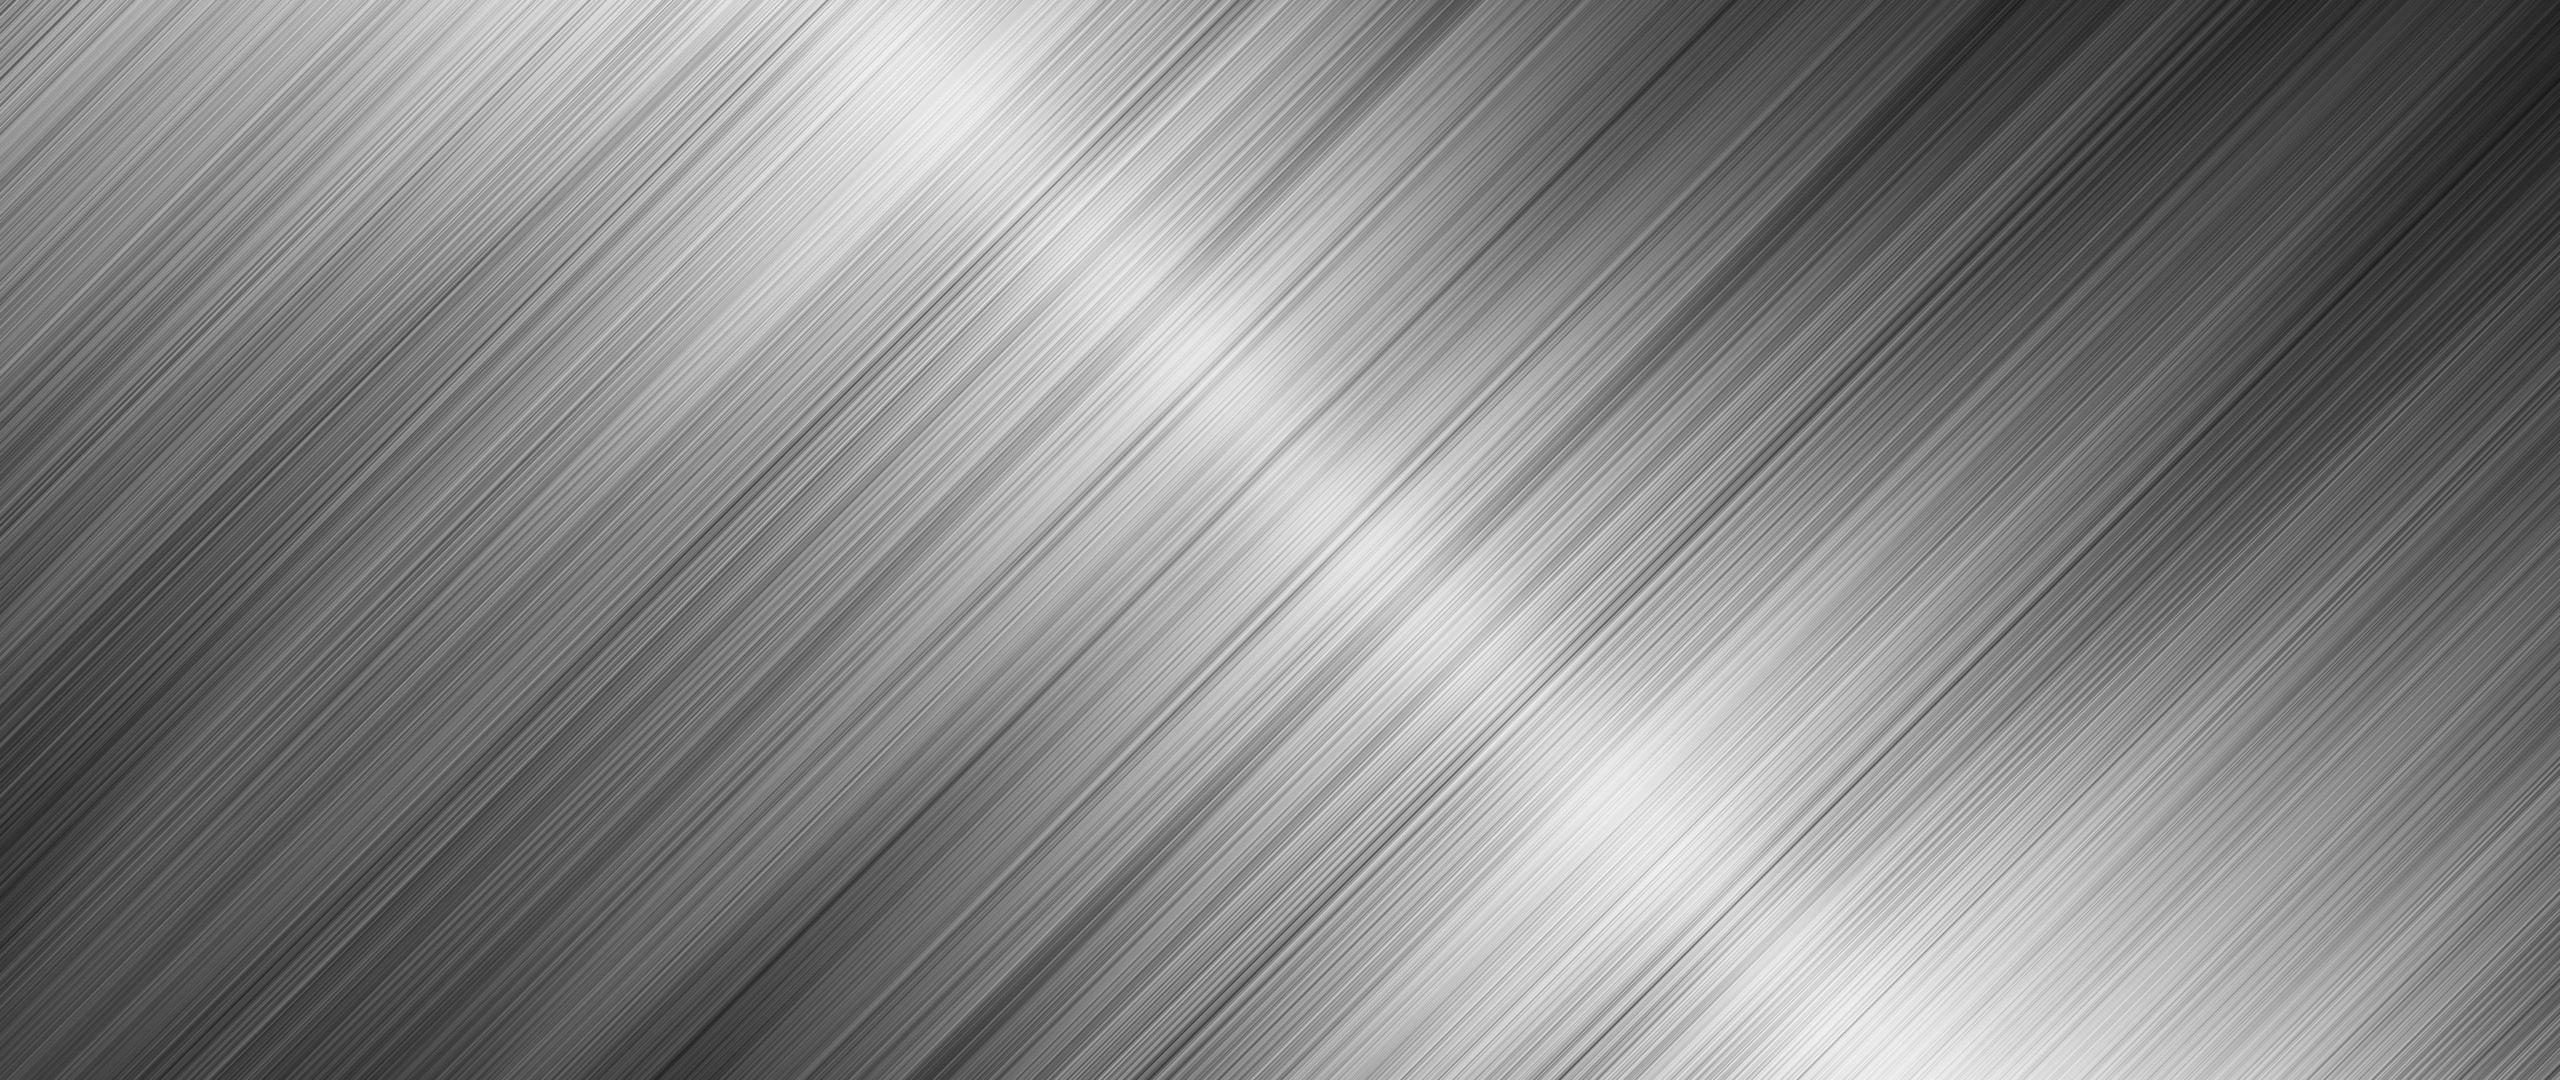 Metal lines resolution, HD 4k wallpapers, Images backgrounds photos, And pictures images backgrounds, 2560x1080 Dual Screen Desktop